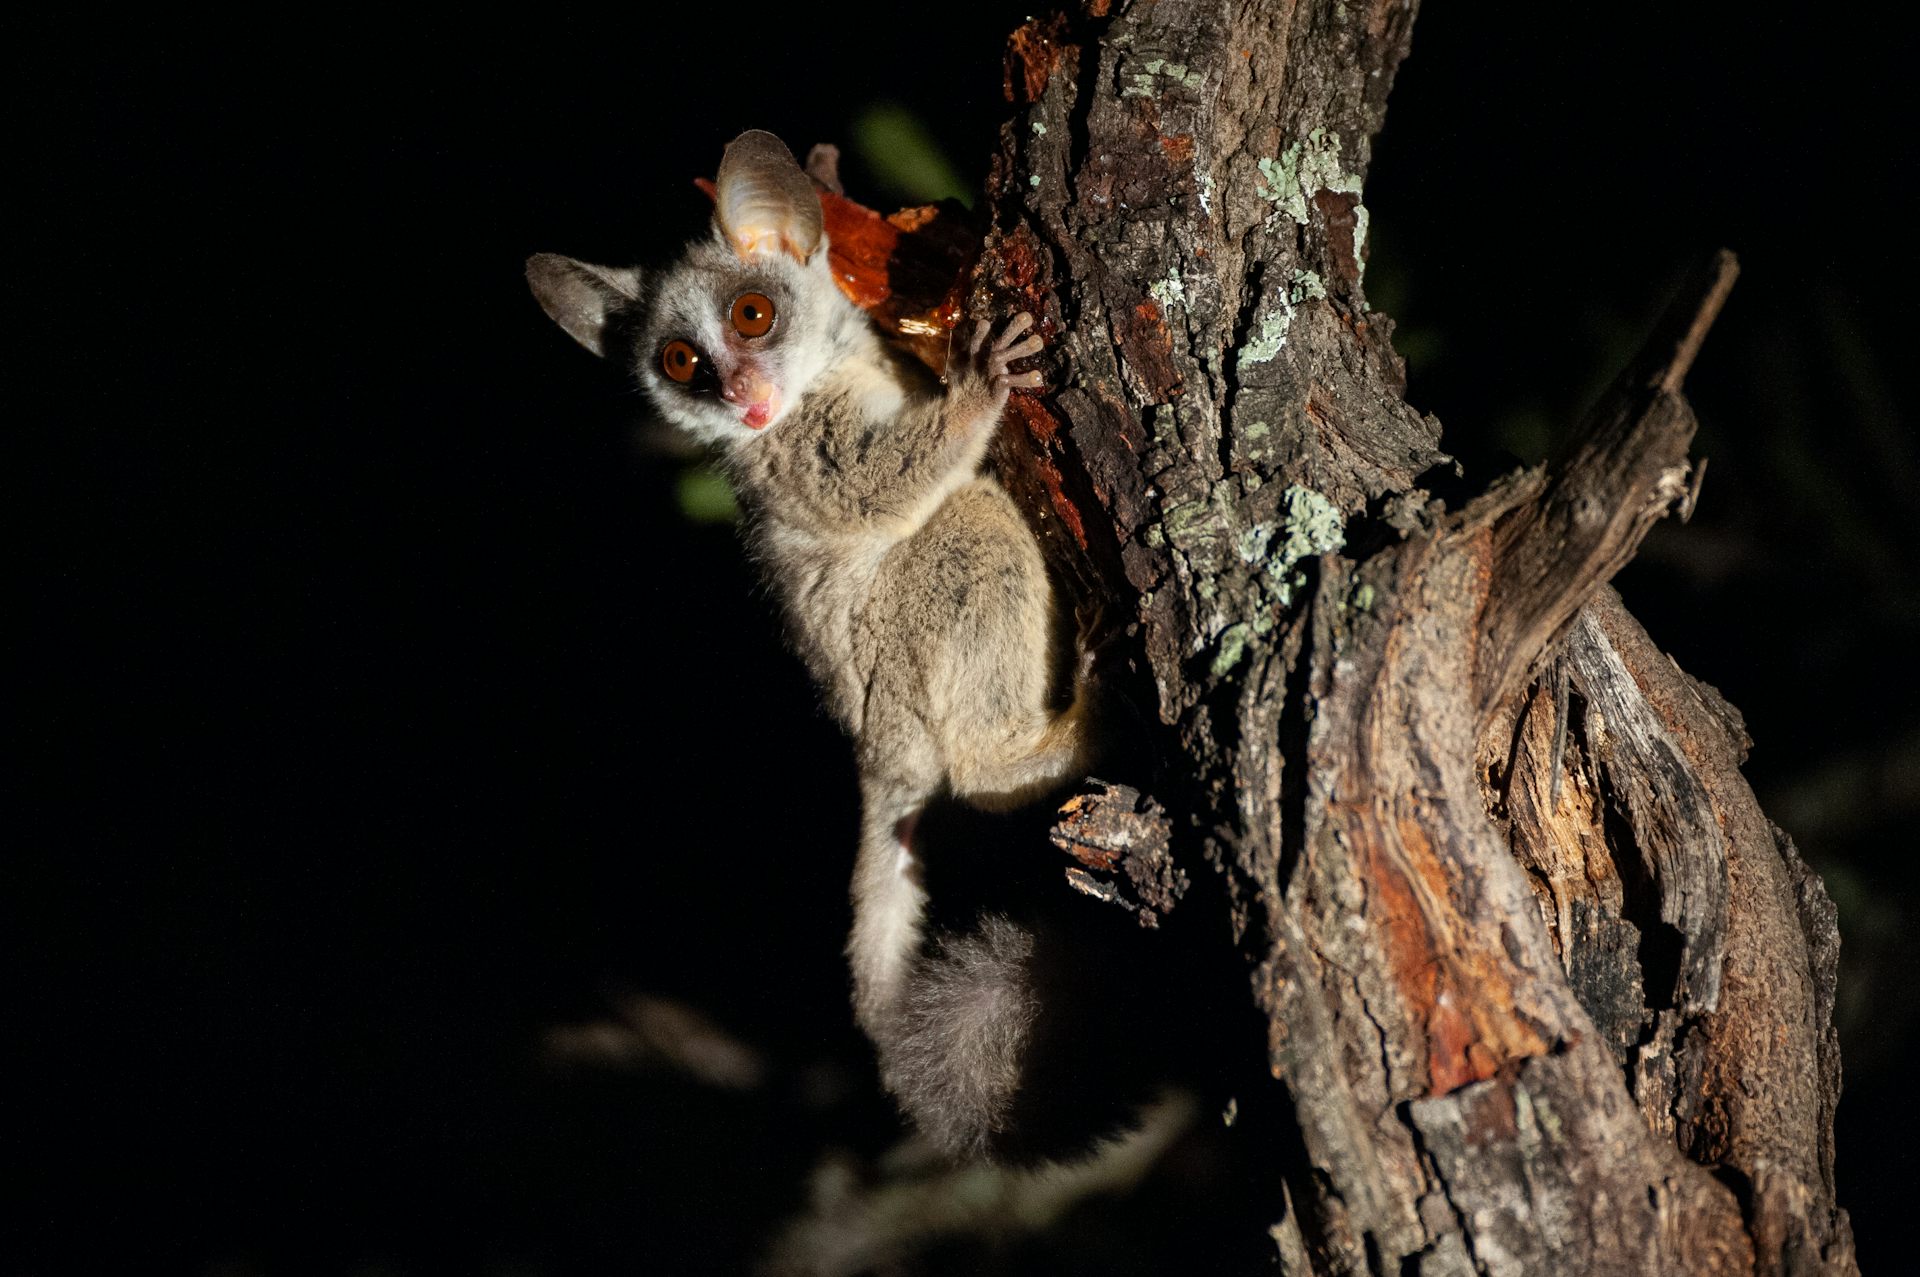 A lesser bushbaby seen feeding on tree resin on a safari at night in South Africa